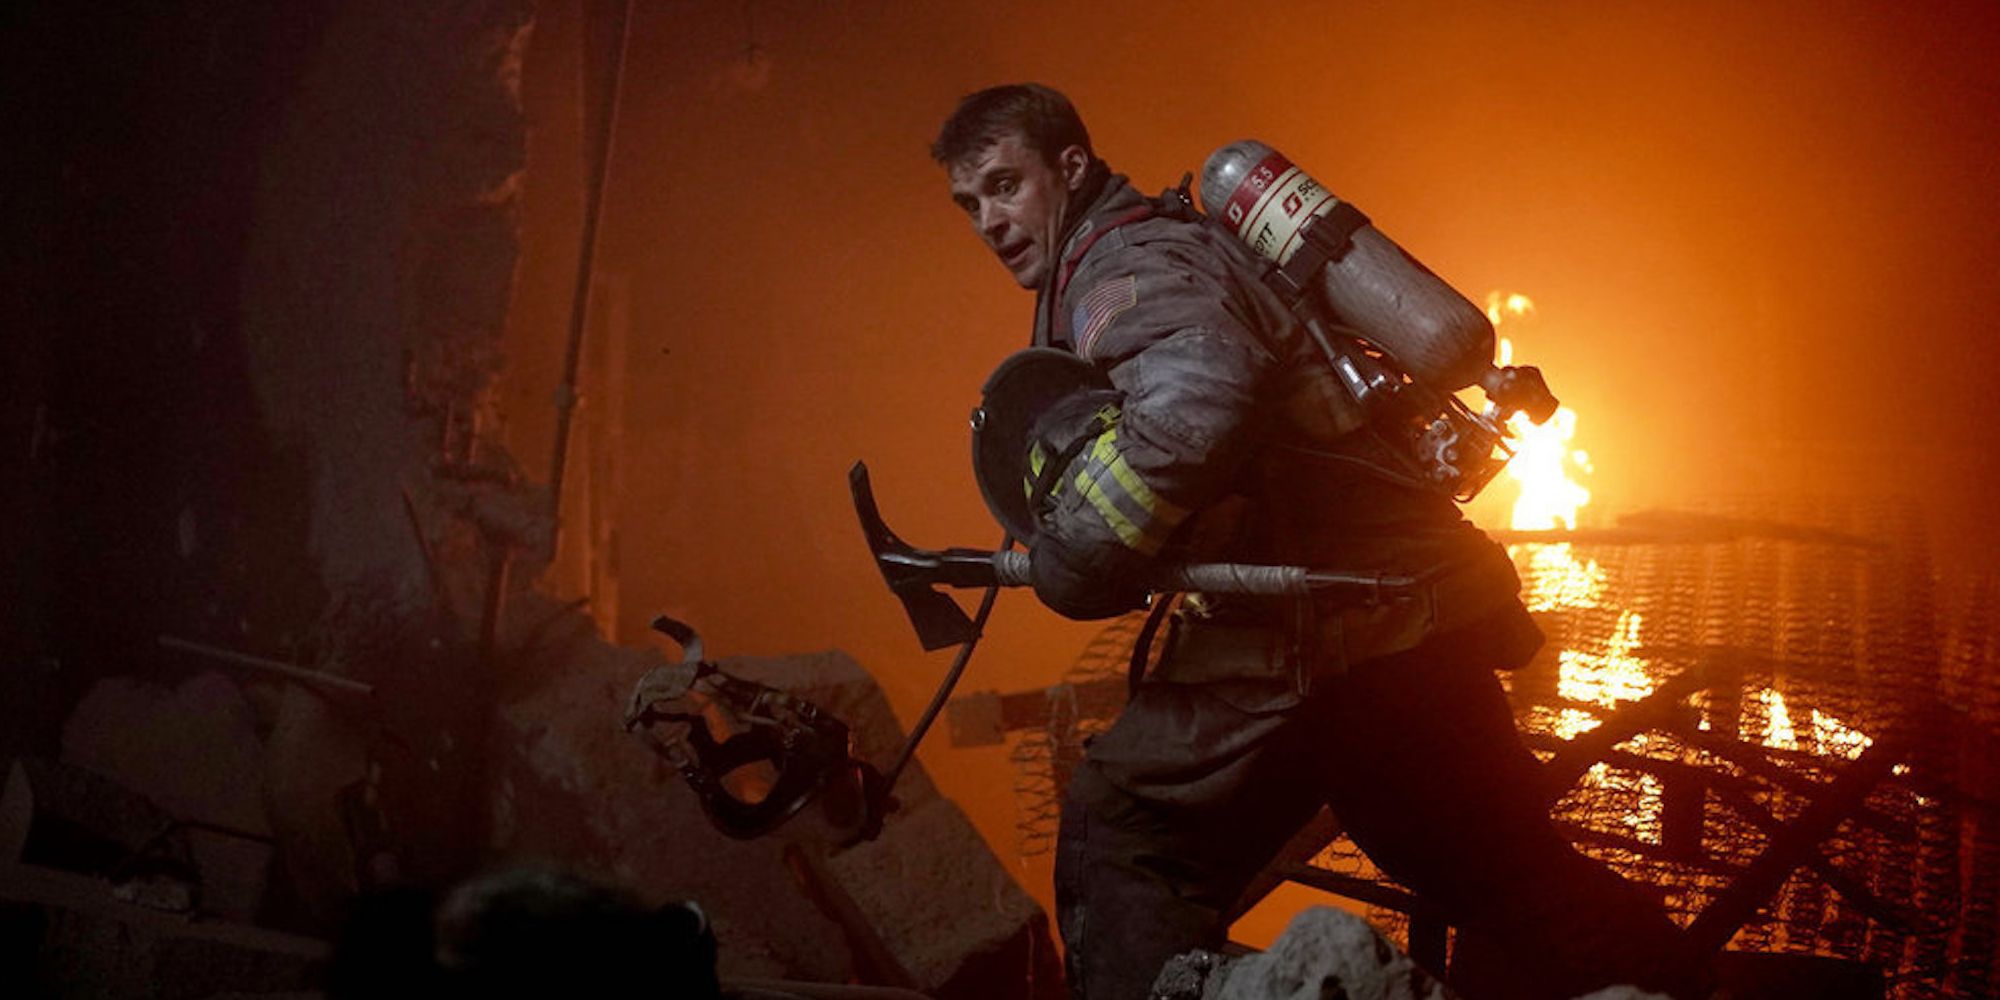 Chicago Fire's Matthew Casey (played by Jesse Spencer) moves through the burning mattress factory